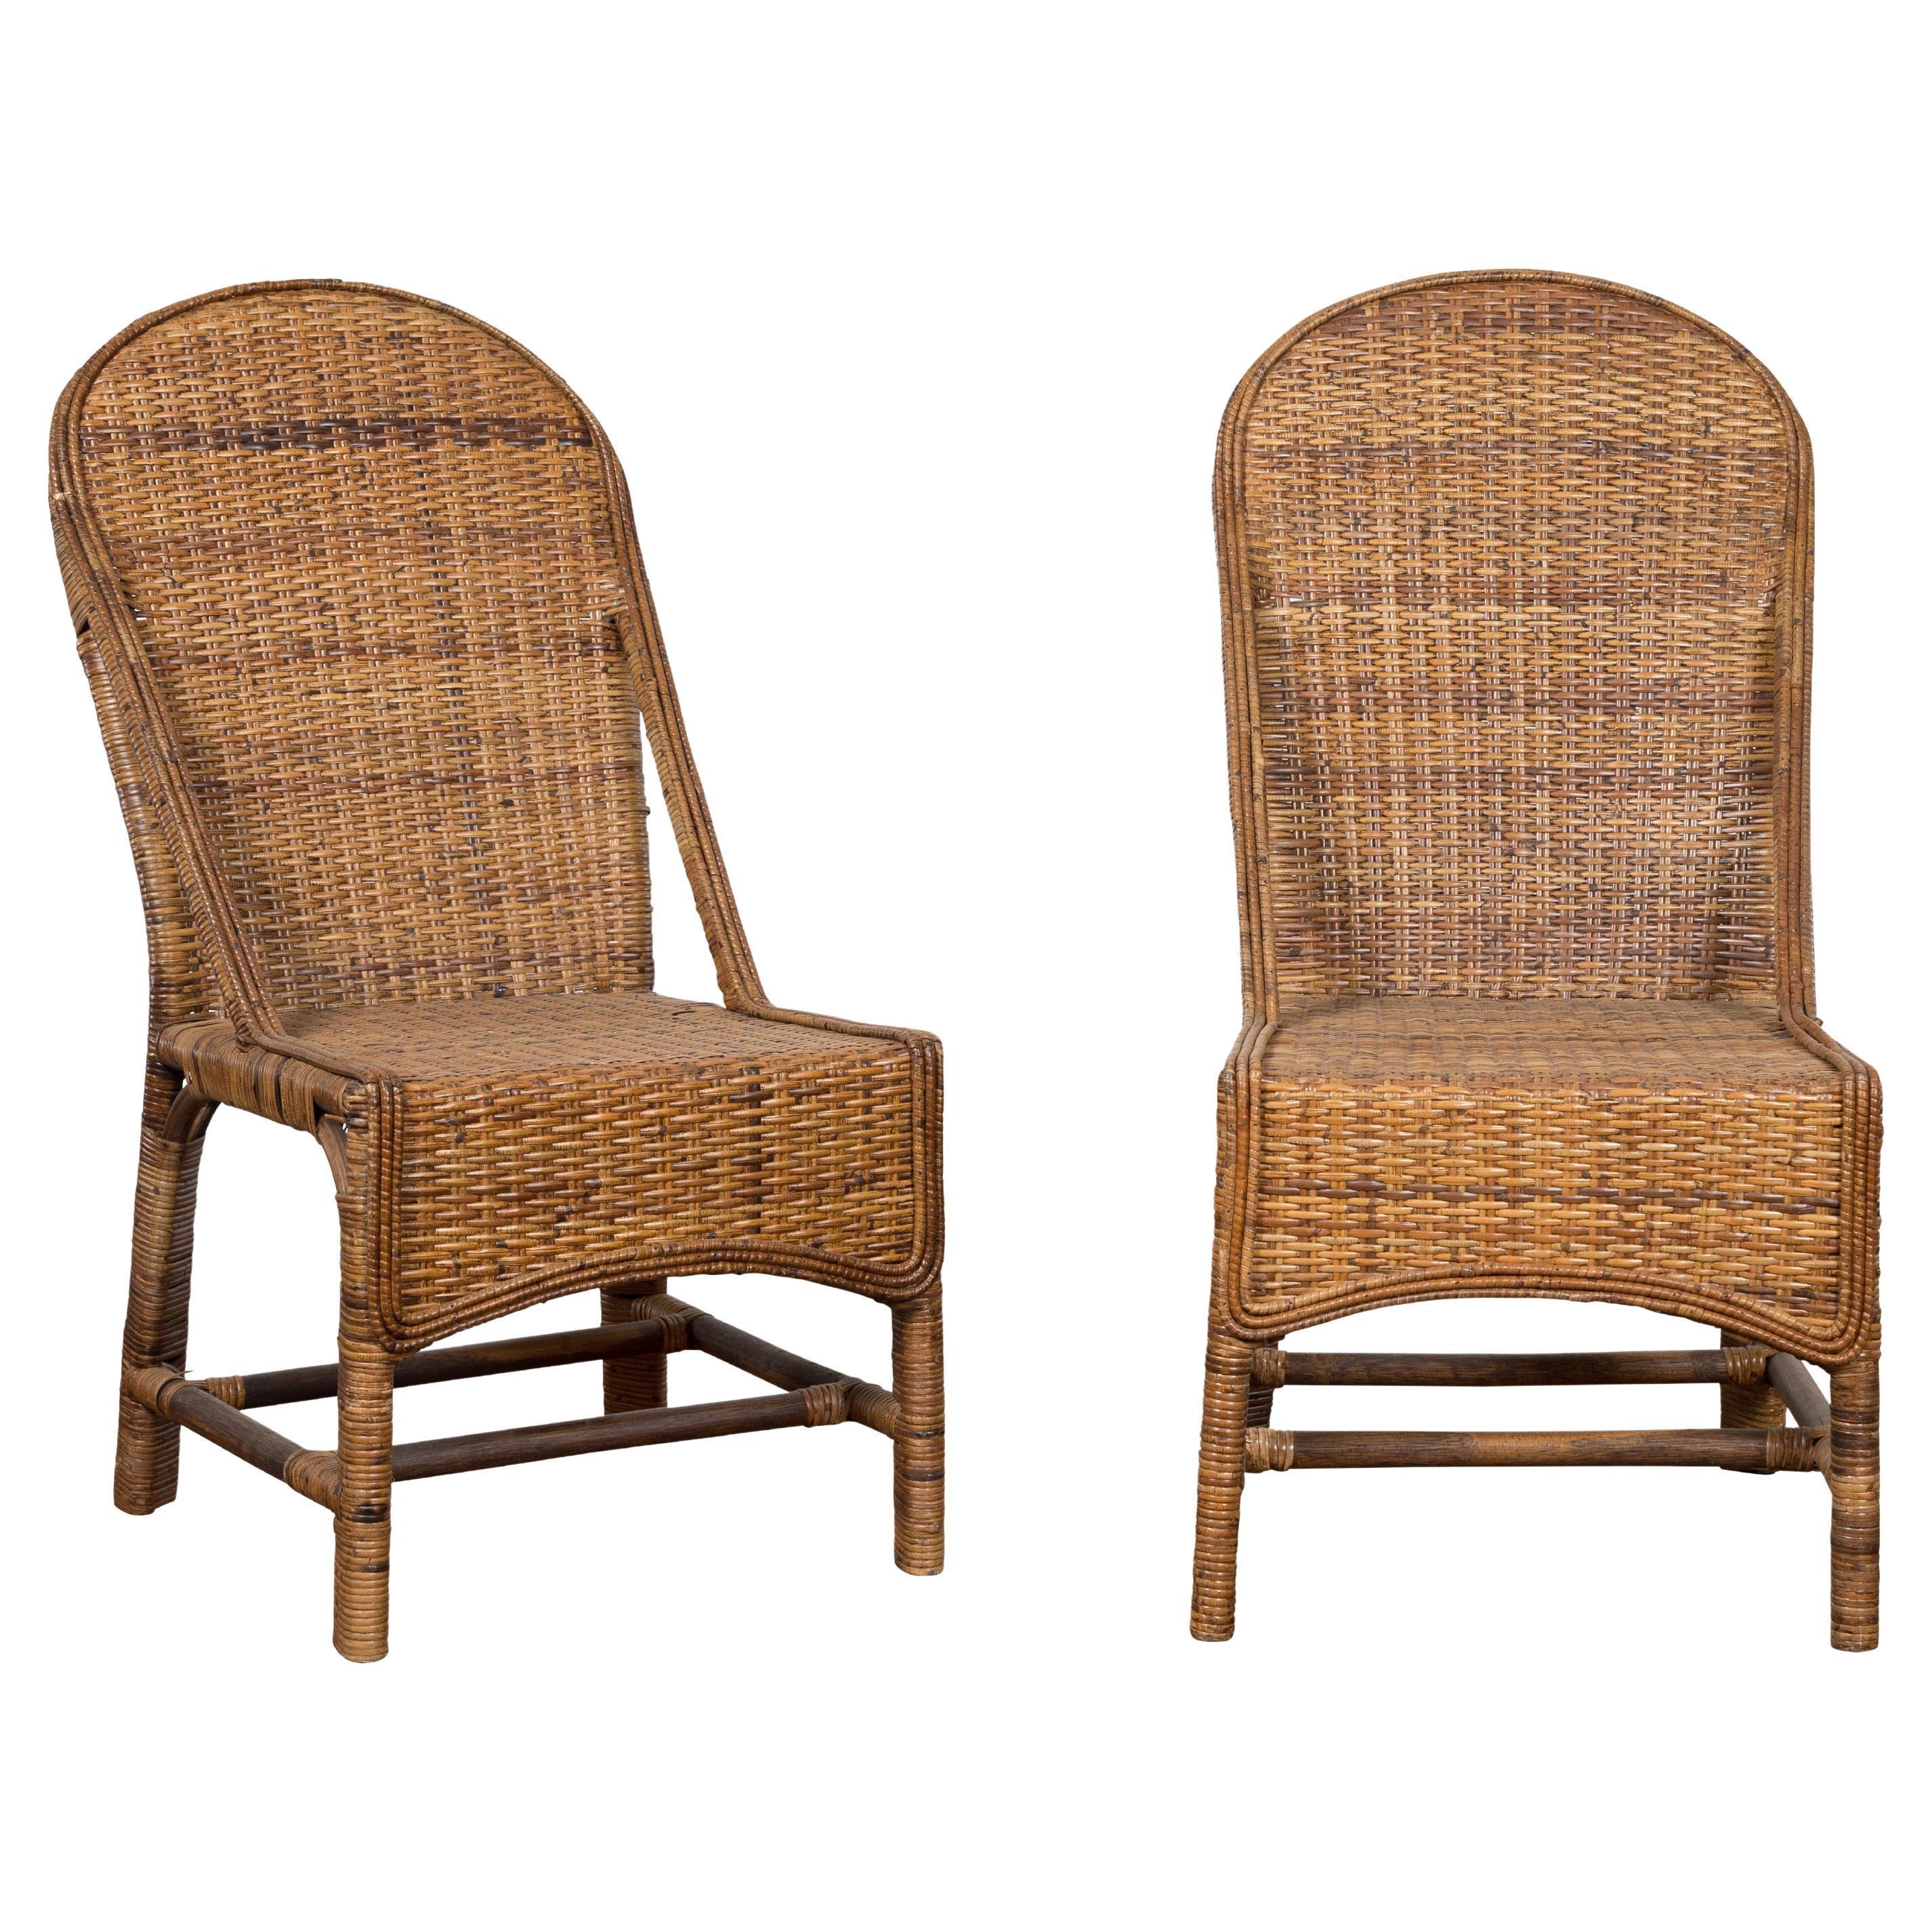 Pair of Burmese Vintage Country Style Woven Rattan and Bamboo Chairs For Sale